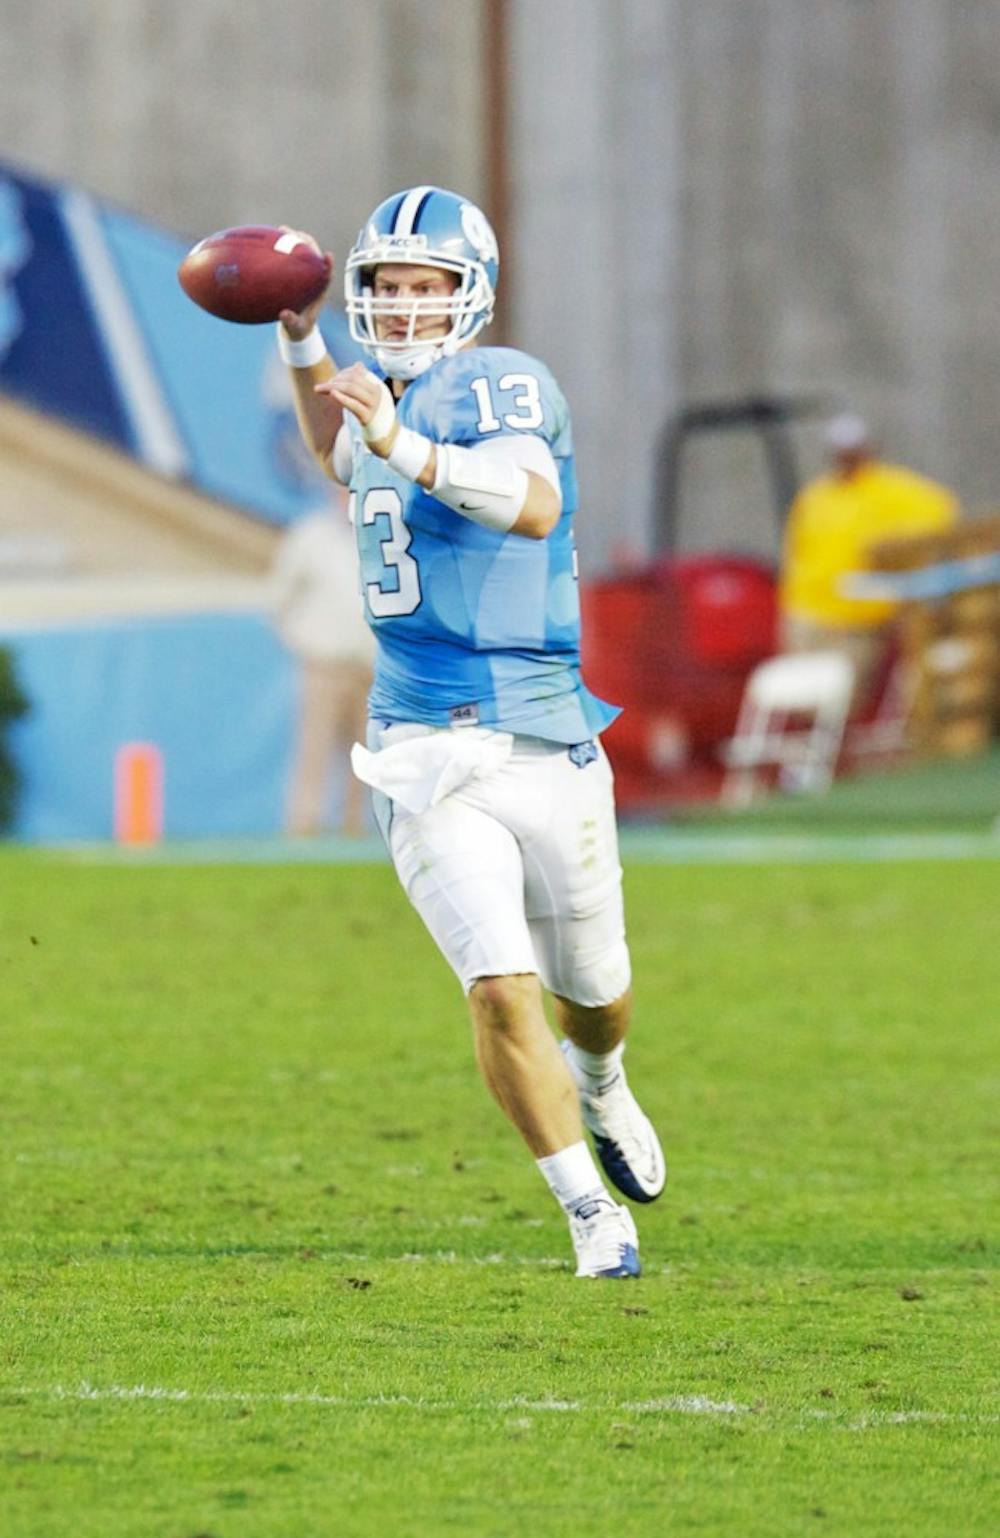 T.J. Yates passed for a UNC single-game record 439 yards against Florida State. He hooked up with Dwight Jones for 233 of those yards. 